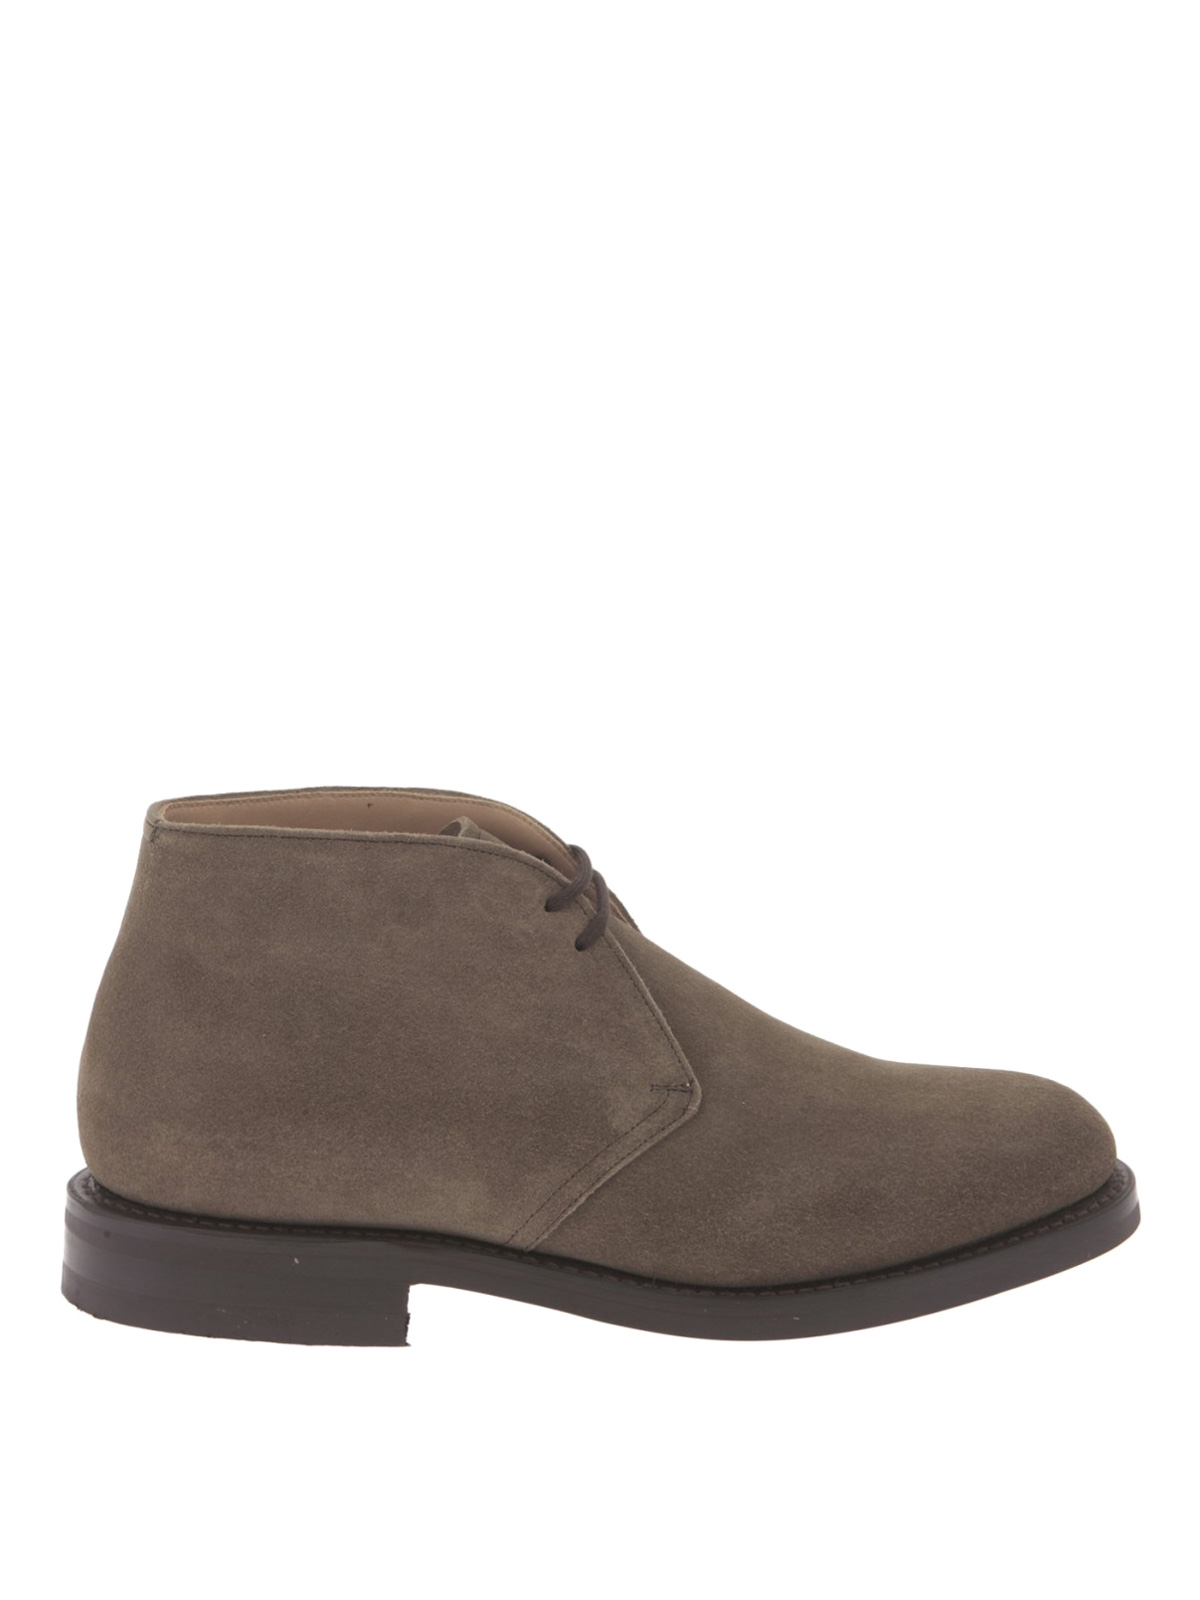 Church's - Ryder 3 suede desert boots - ankle boots - ETC0019VEF0AQY